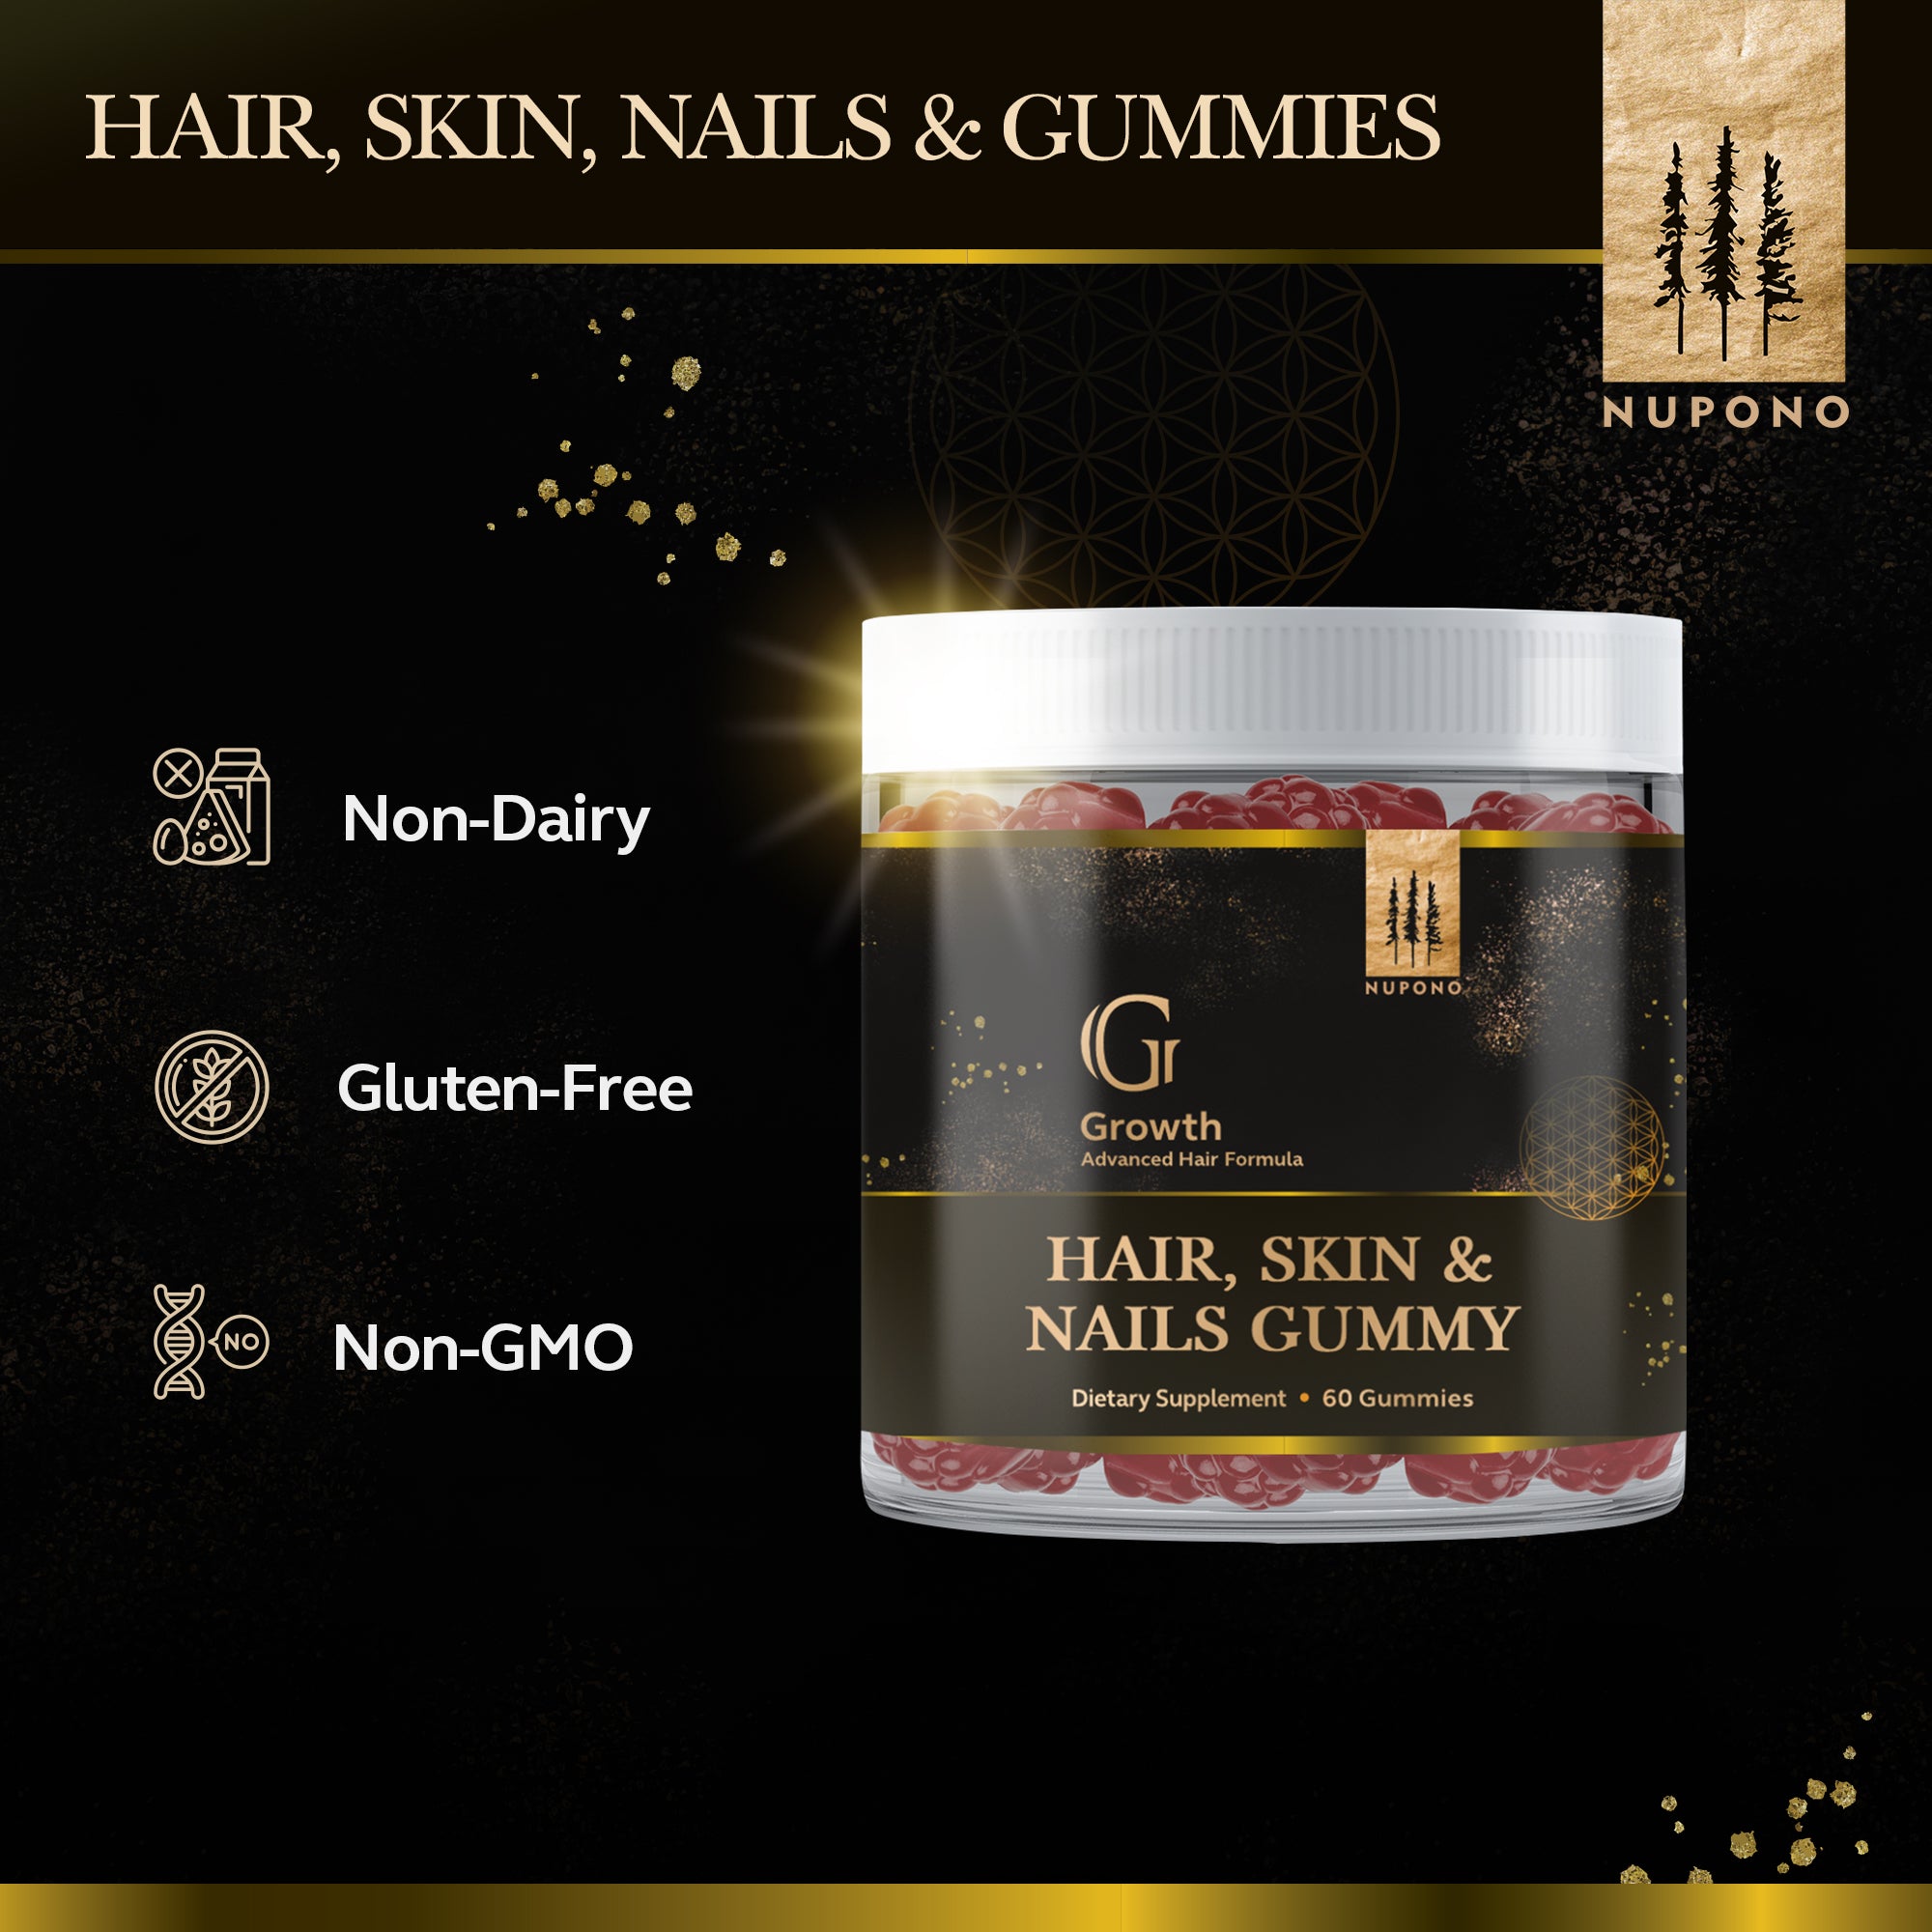 Hair, Skin & Nails Gummies, 60 Gummies - Improves Hair Luster and Shine, Strengthens Nails, and Supports Healthy Skin. Vitamin A, C, D, E, B6